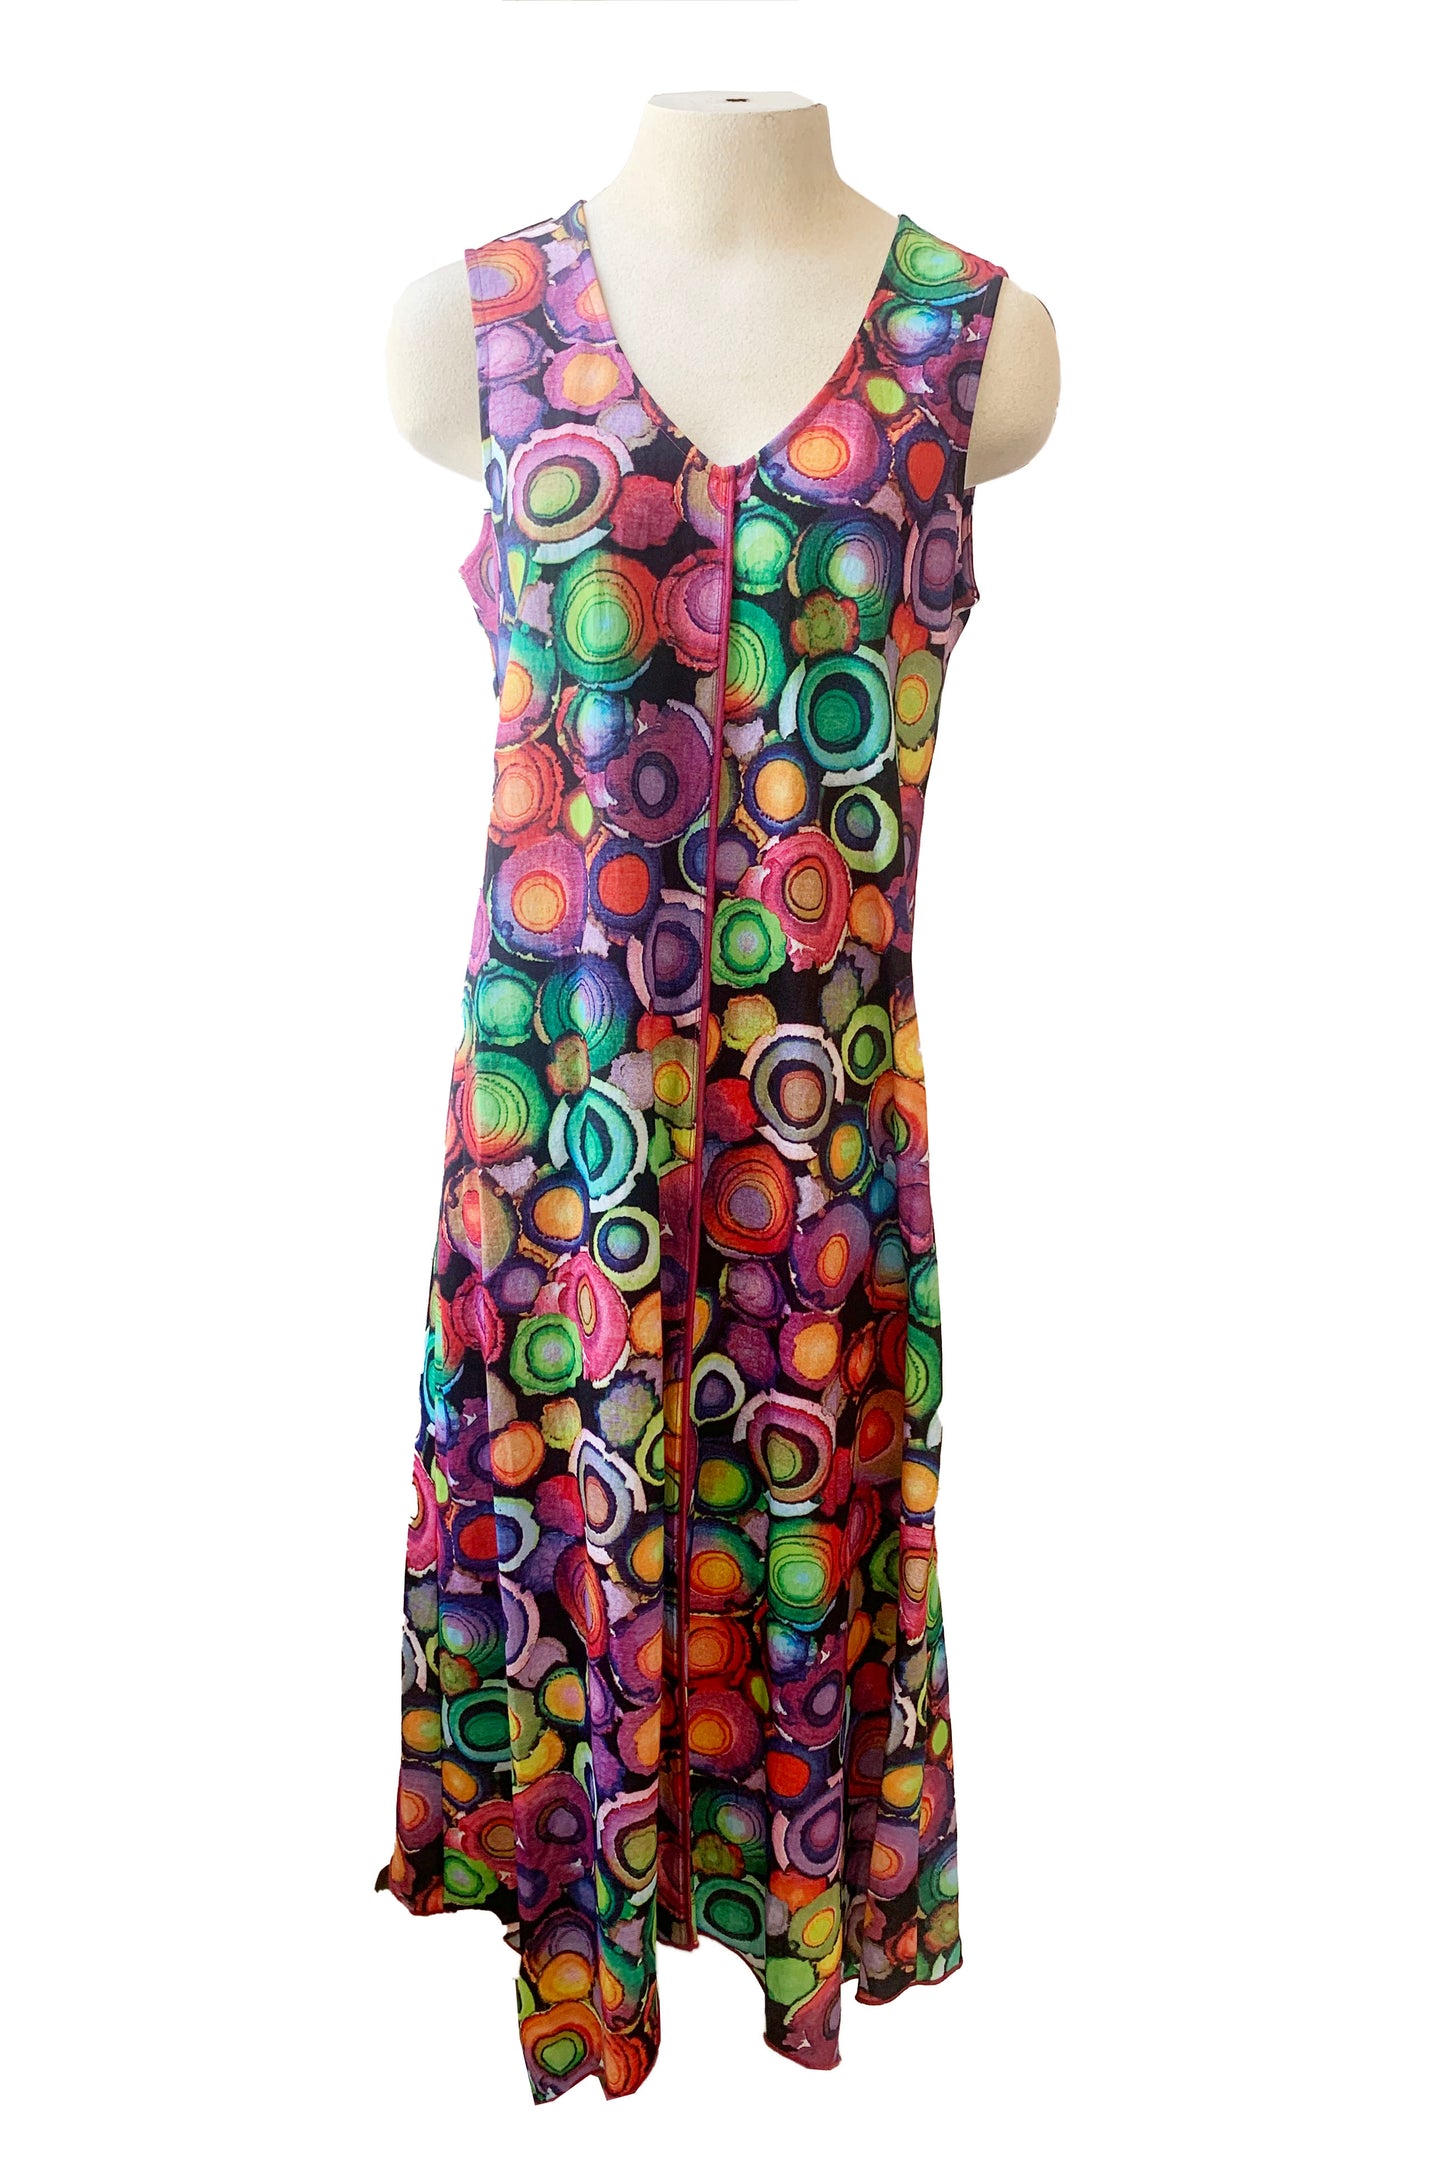 The Camryn Dress by Pure Essence, featuring a multicolour circles print, is shown on a mannequin against a white background 